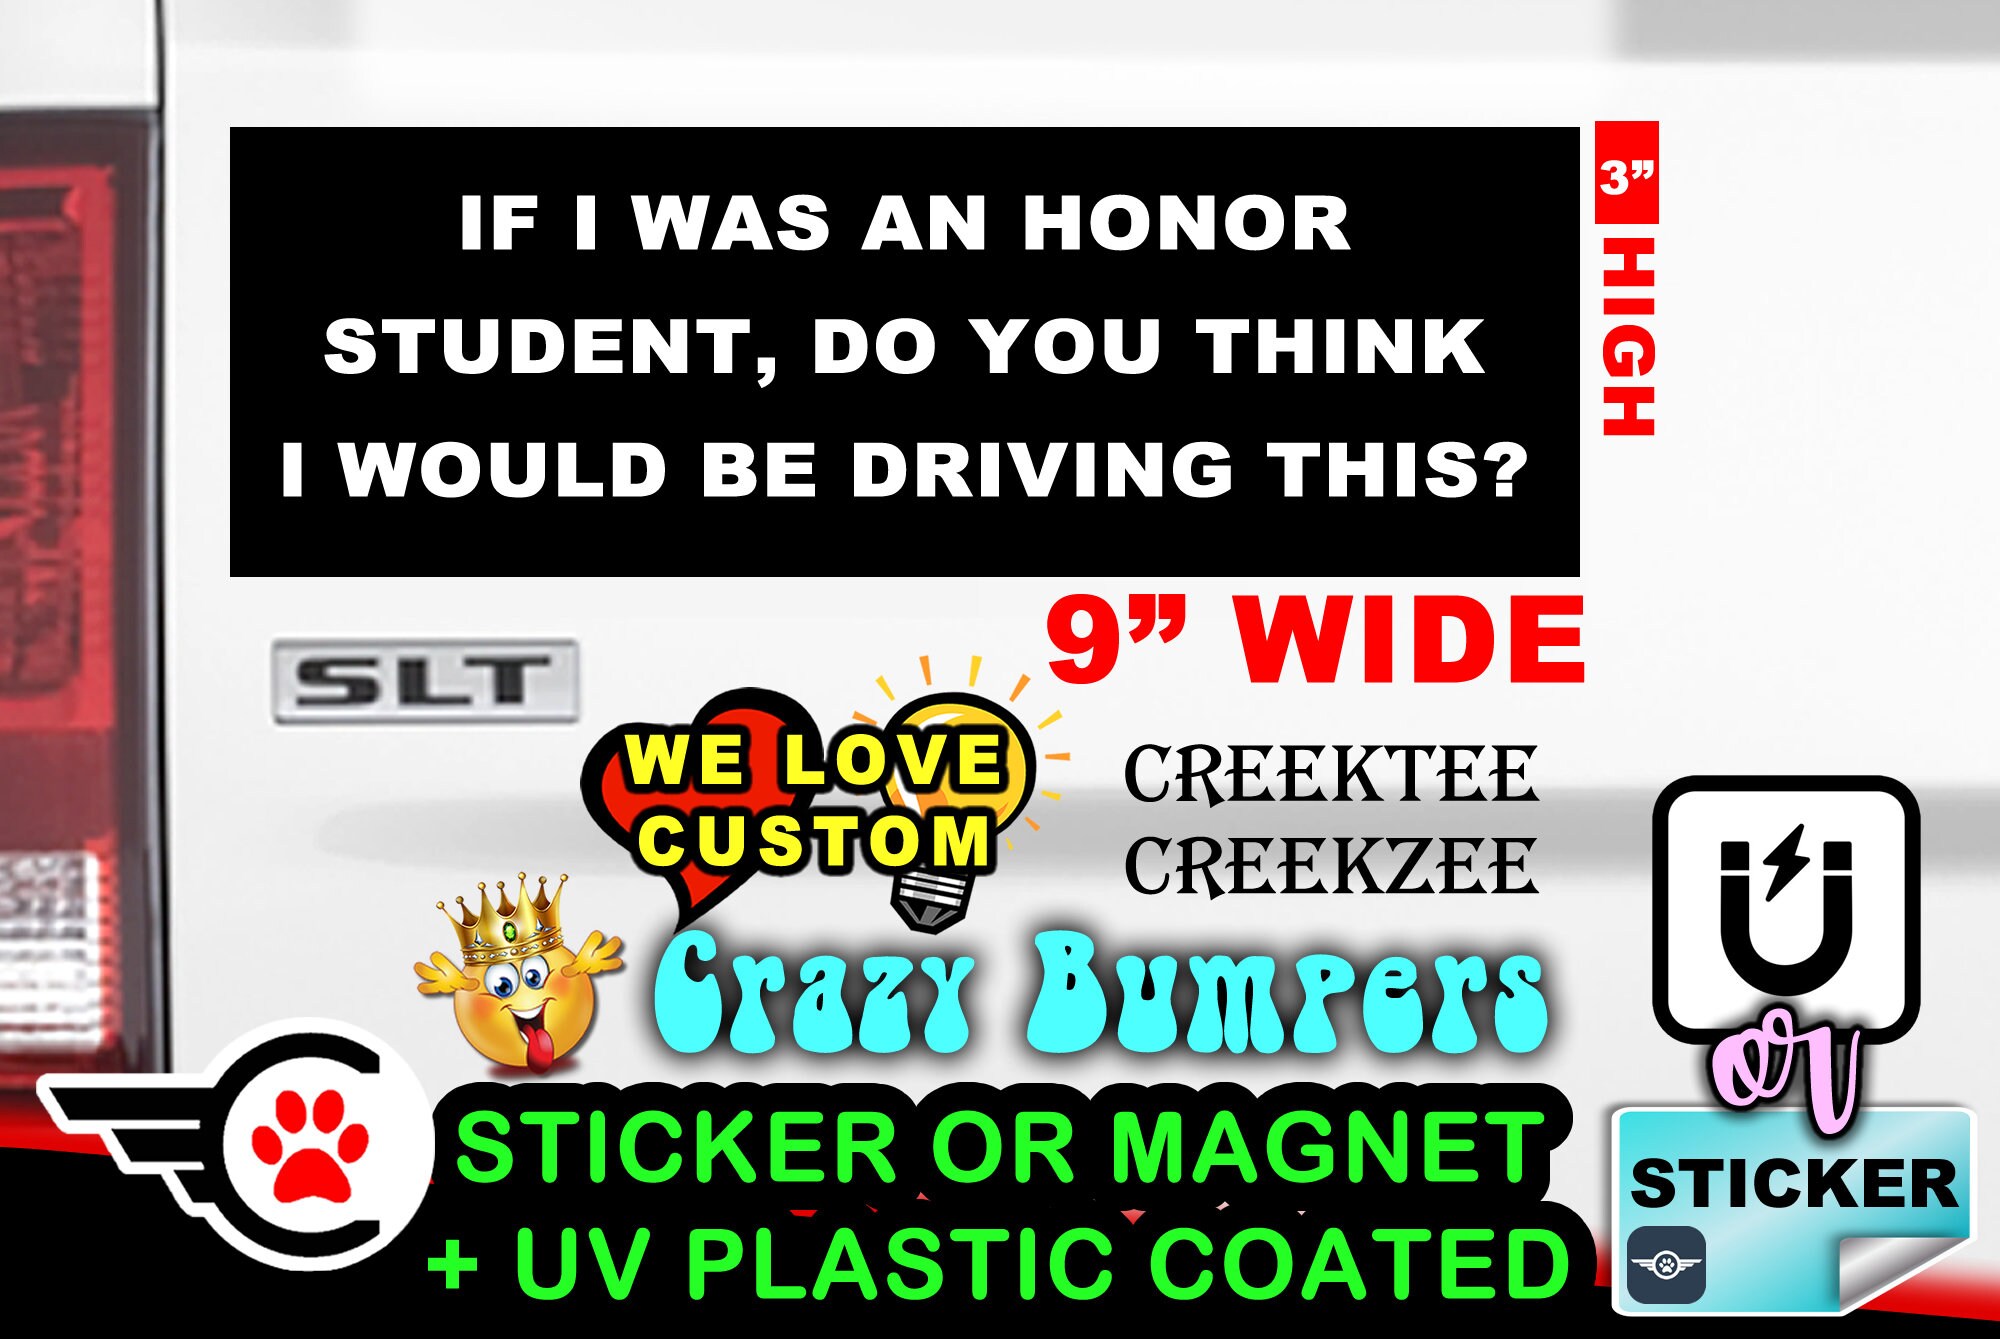 If i was an honor student do you think i would be driving this? Bumper Sticker or Magnet 9